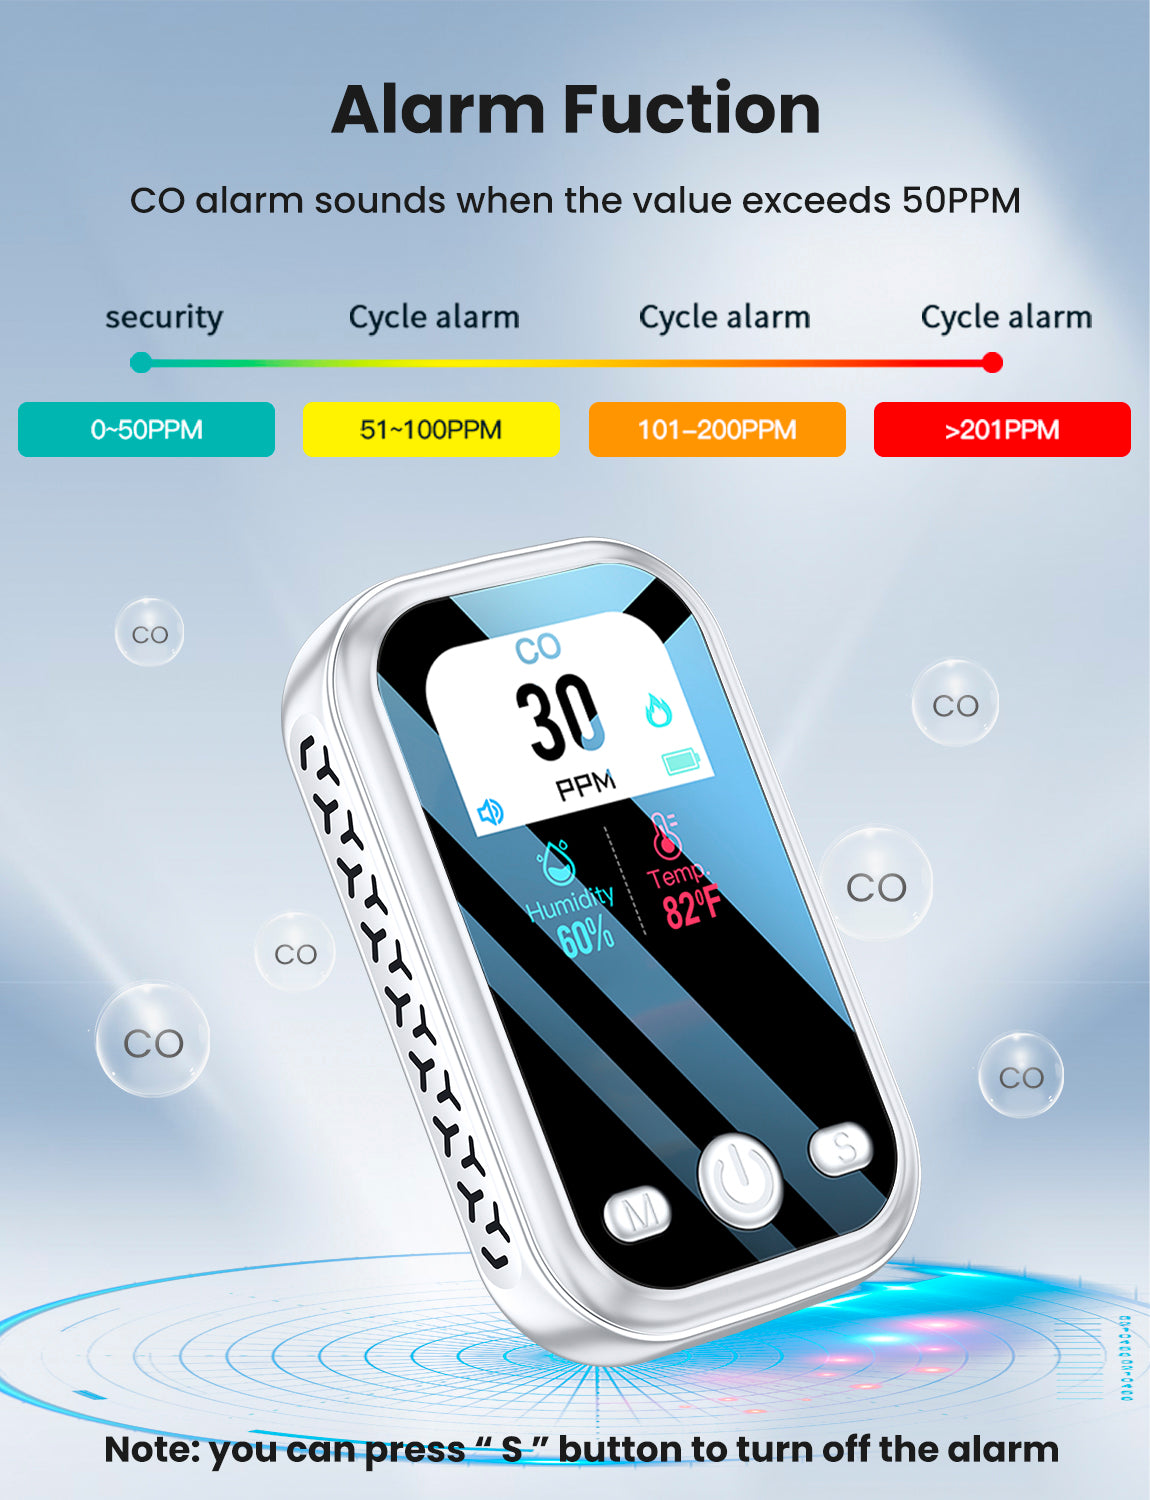 LSENLTY Mini Bluetooth Temperature and Humidity with 300 Days Battery